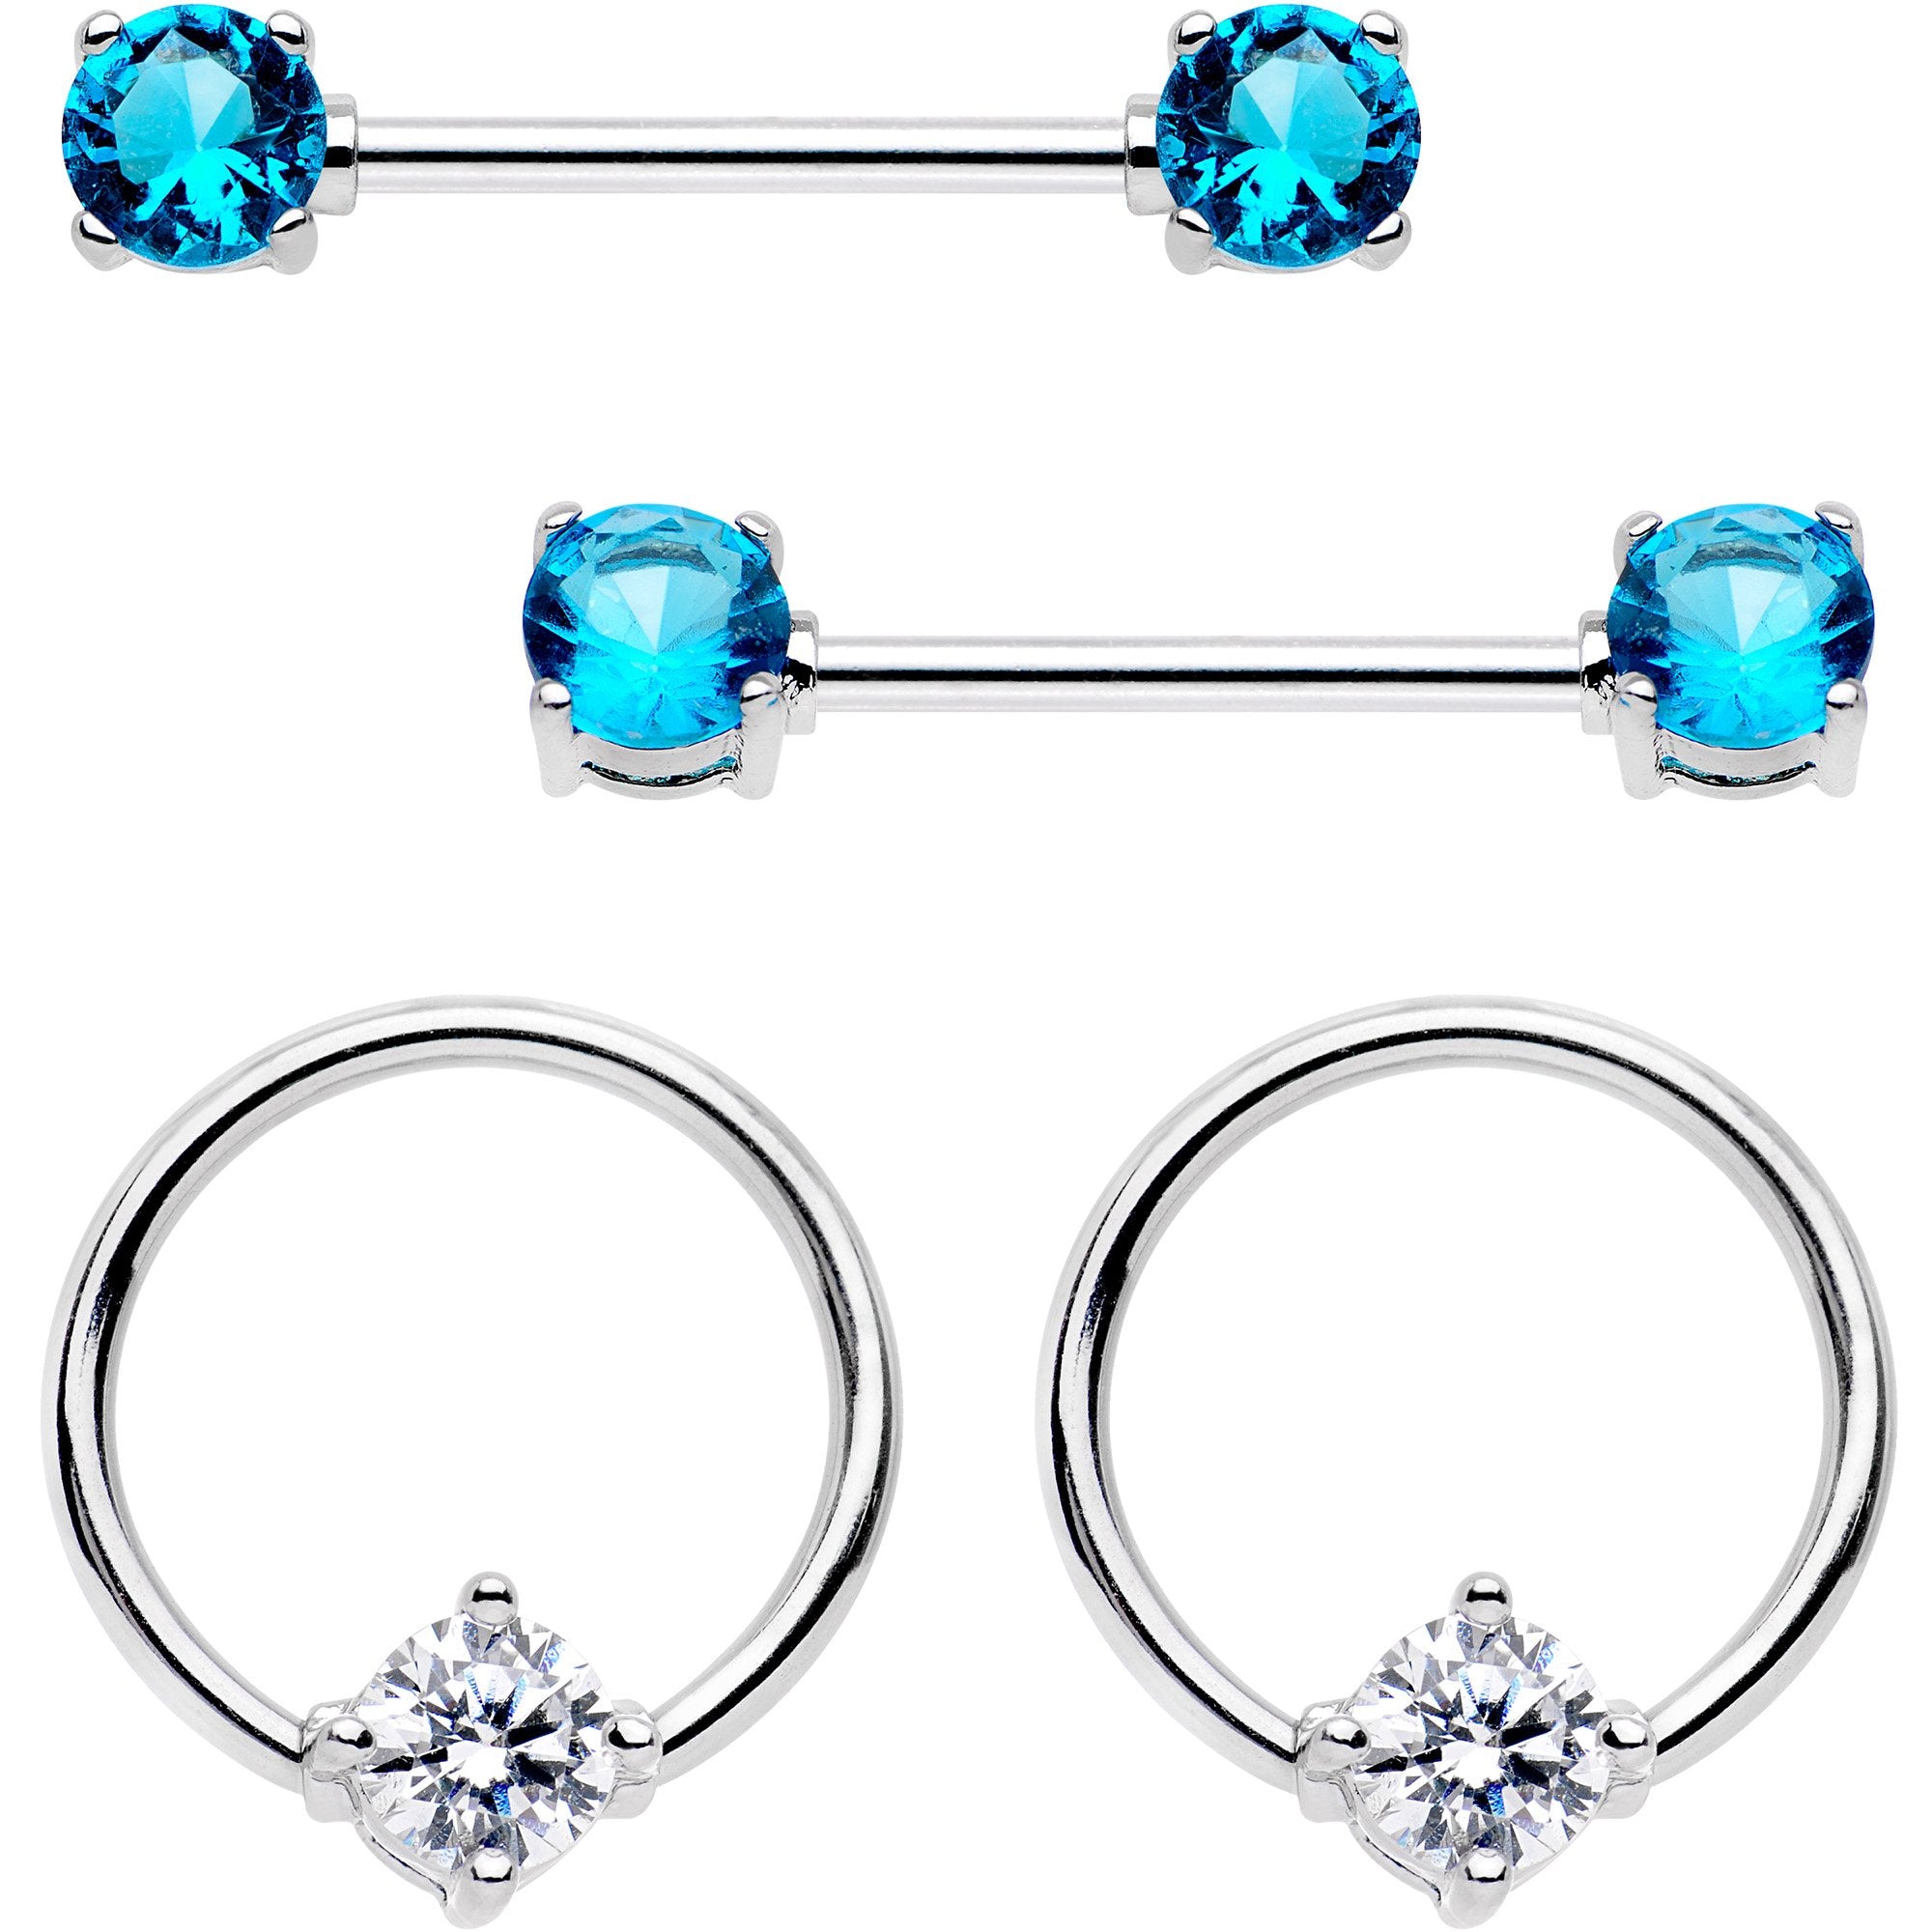 5/8 Blue Clear Gem Captive Ring Straight Barbell Nipple Ring Set